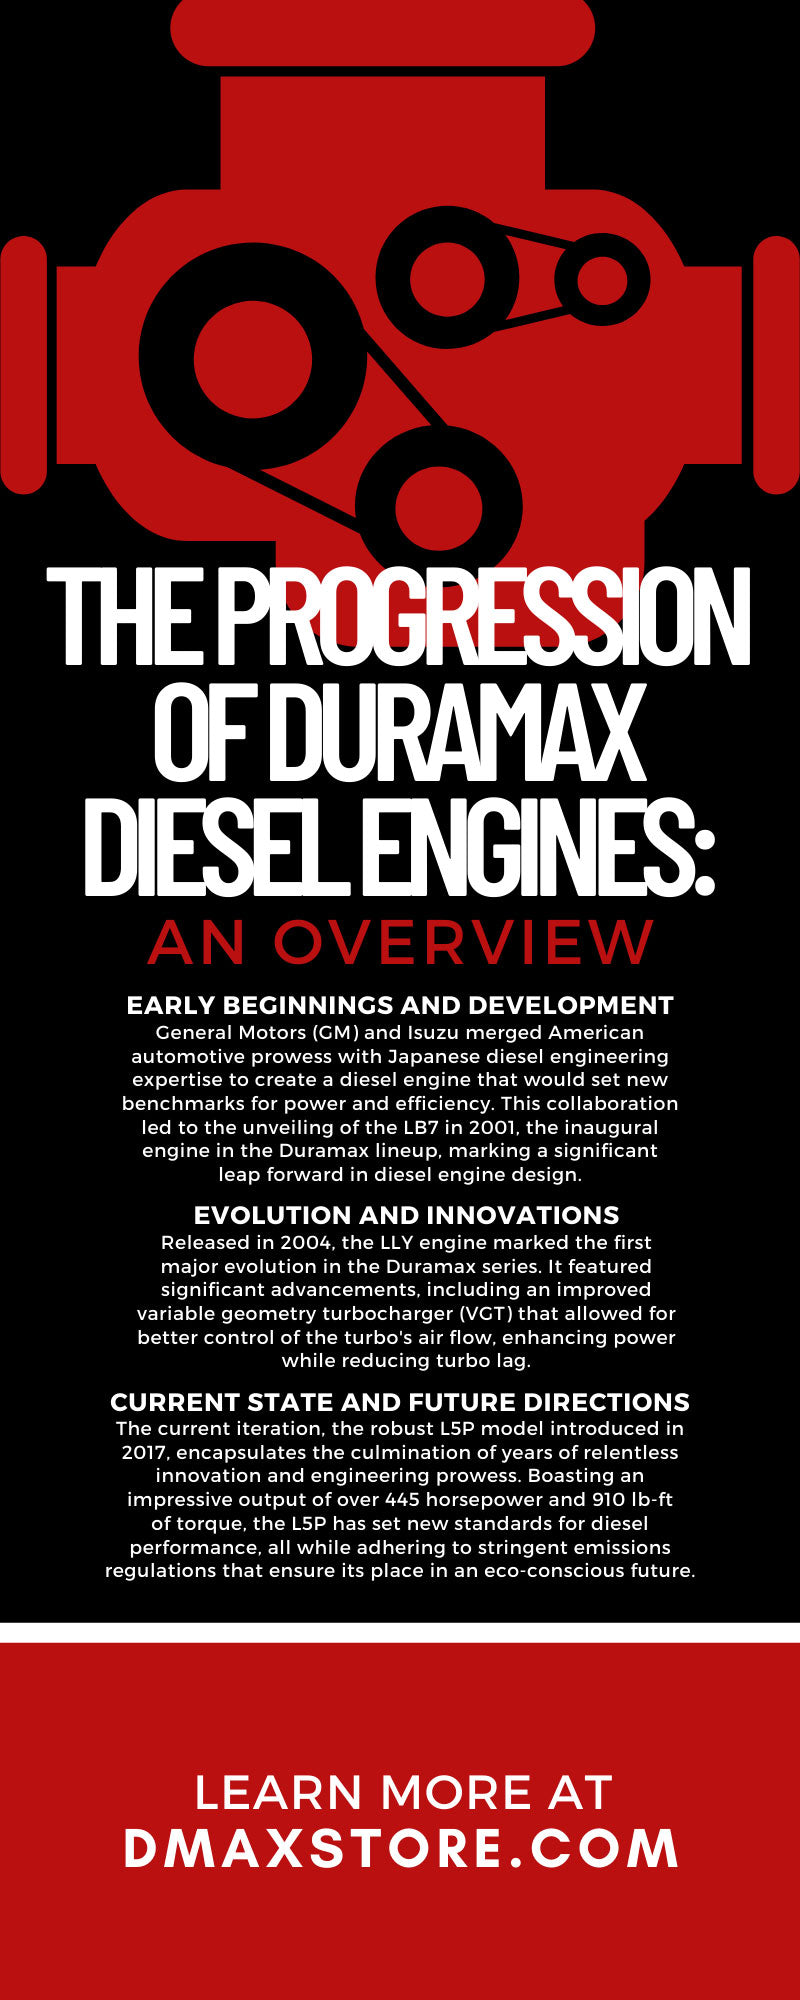 The Progression of Duramax Diesel Engines: An Overview